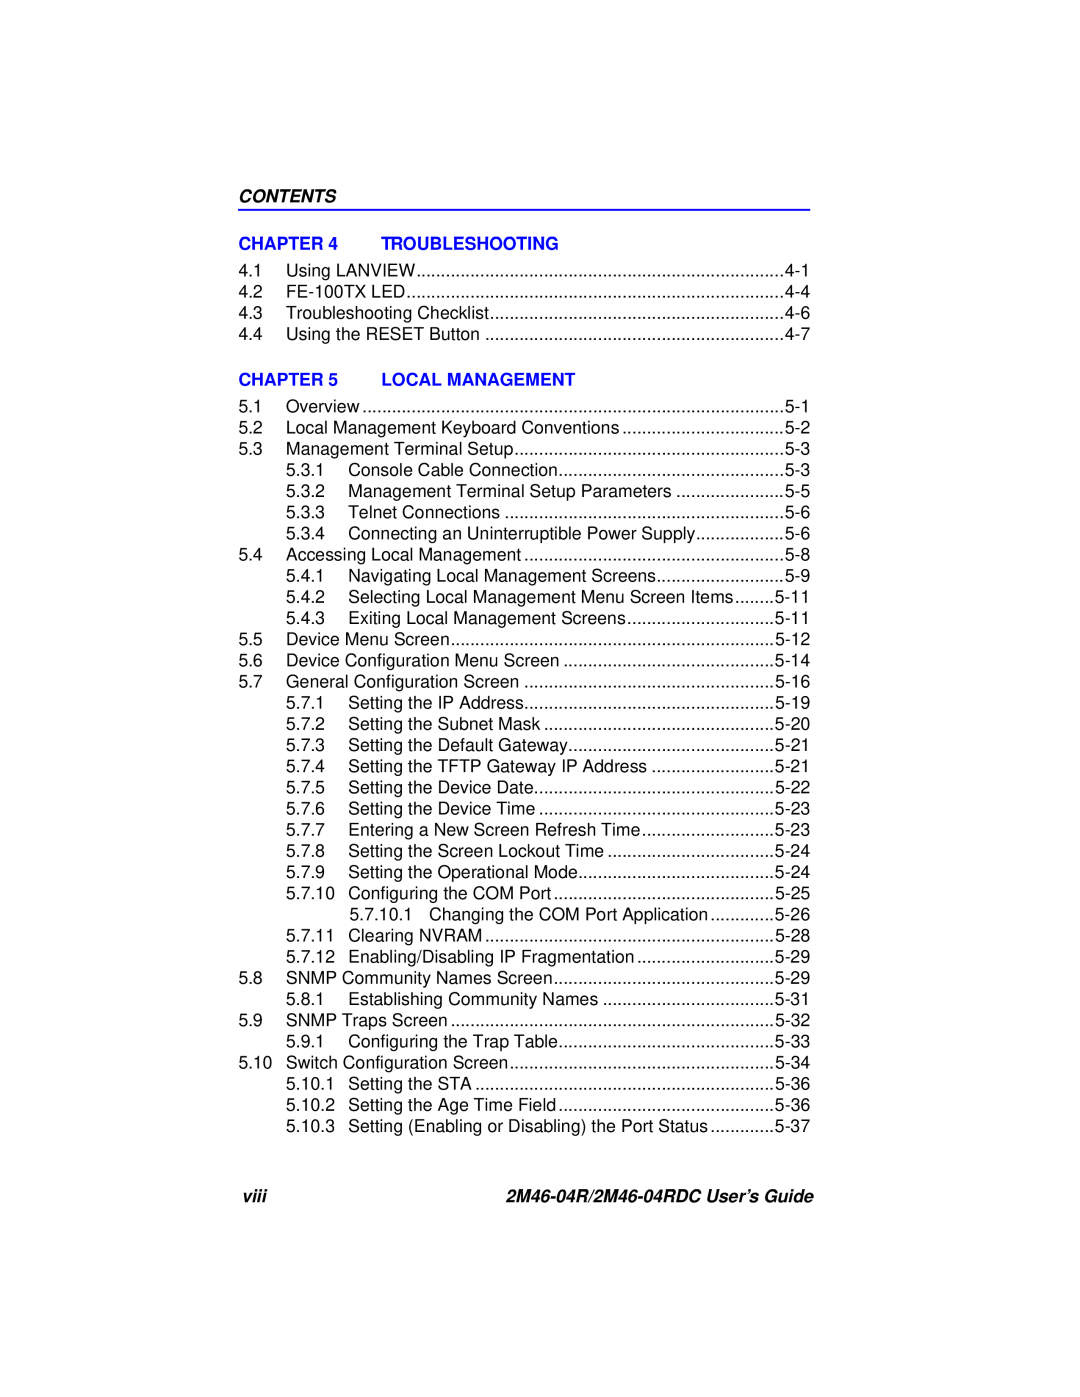 Cabletron Systems pmn manual Contents, Chapter, Troubleshooting, Local Management, viii, 2M46-04R/2M46-04RDC User’s Guide 